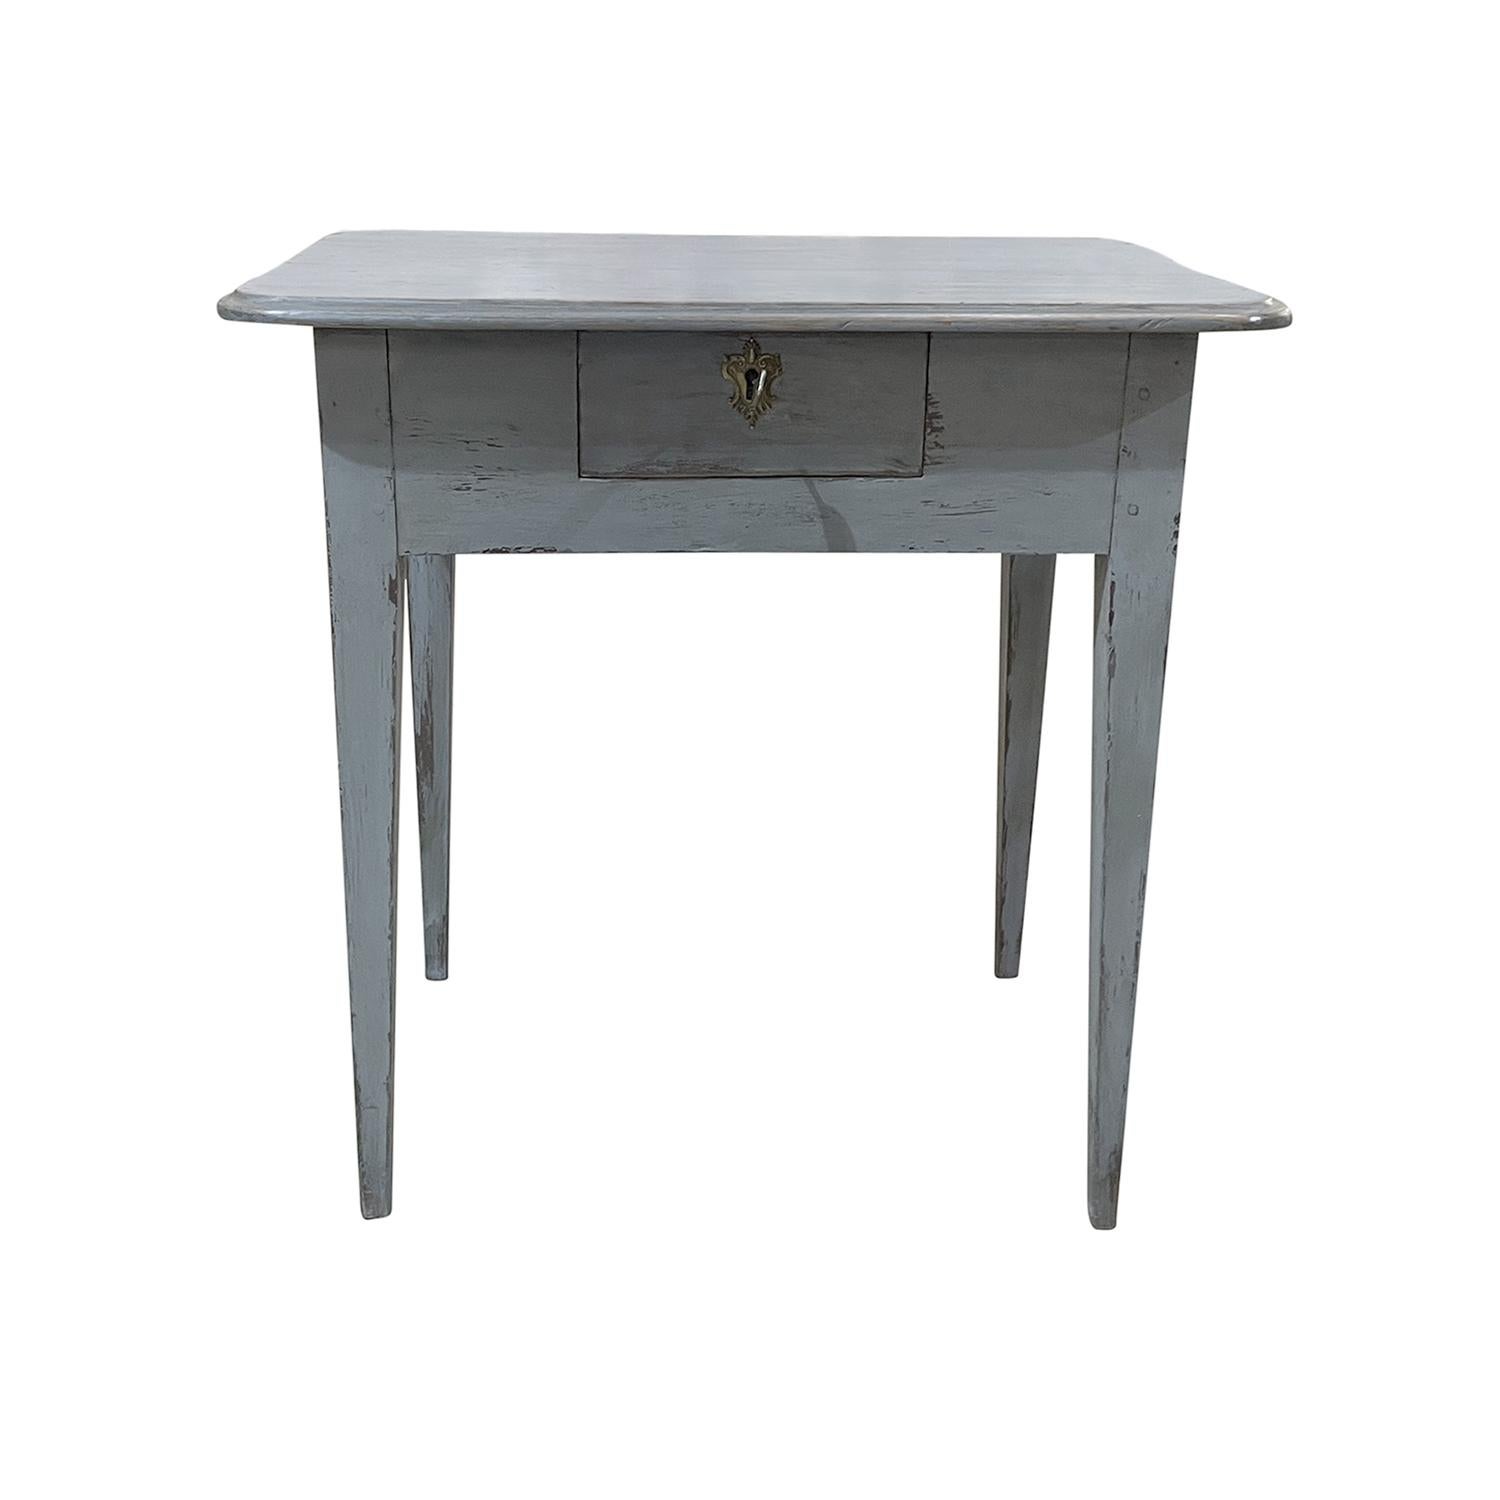 A blue-grey, antique Swedish Gustavian single center, kitchen table made of hand crafted painted Pinewood, in good condition. The Scandinavian side table is composed with one drawer, consisting its original detailed bronze hardware and key, standing